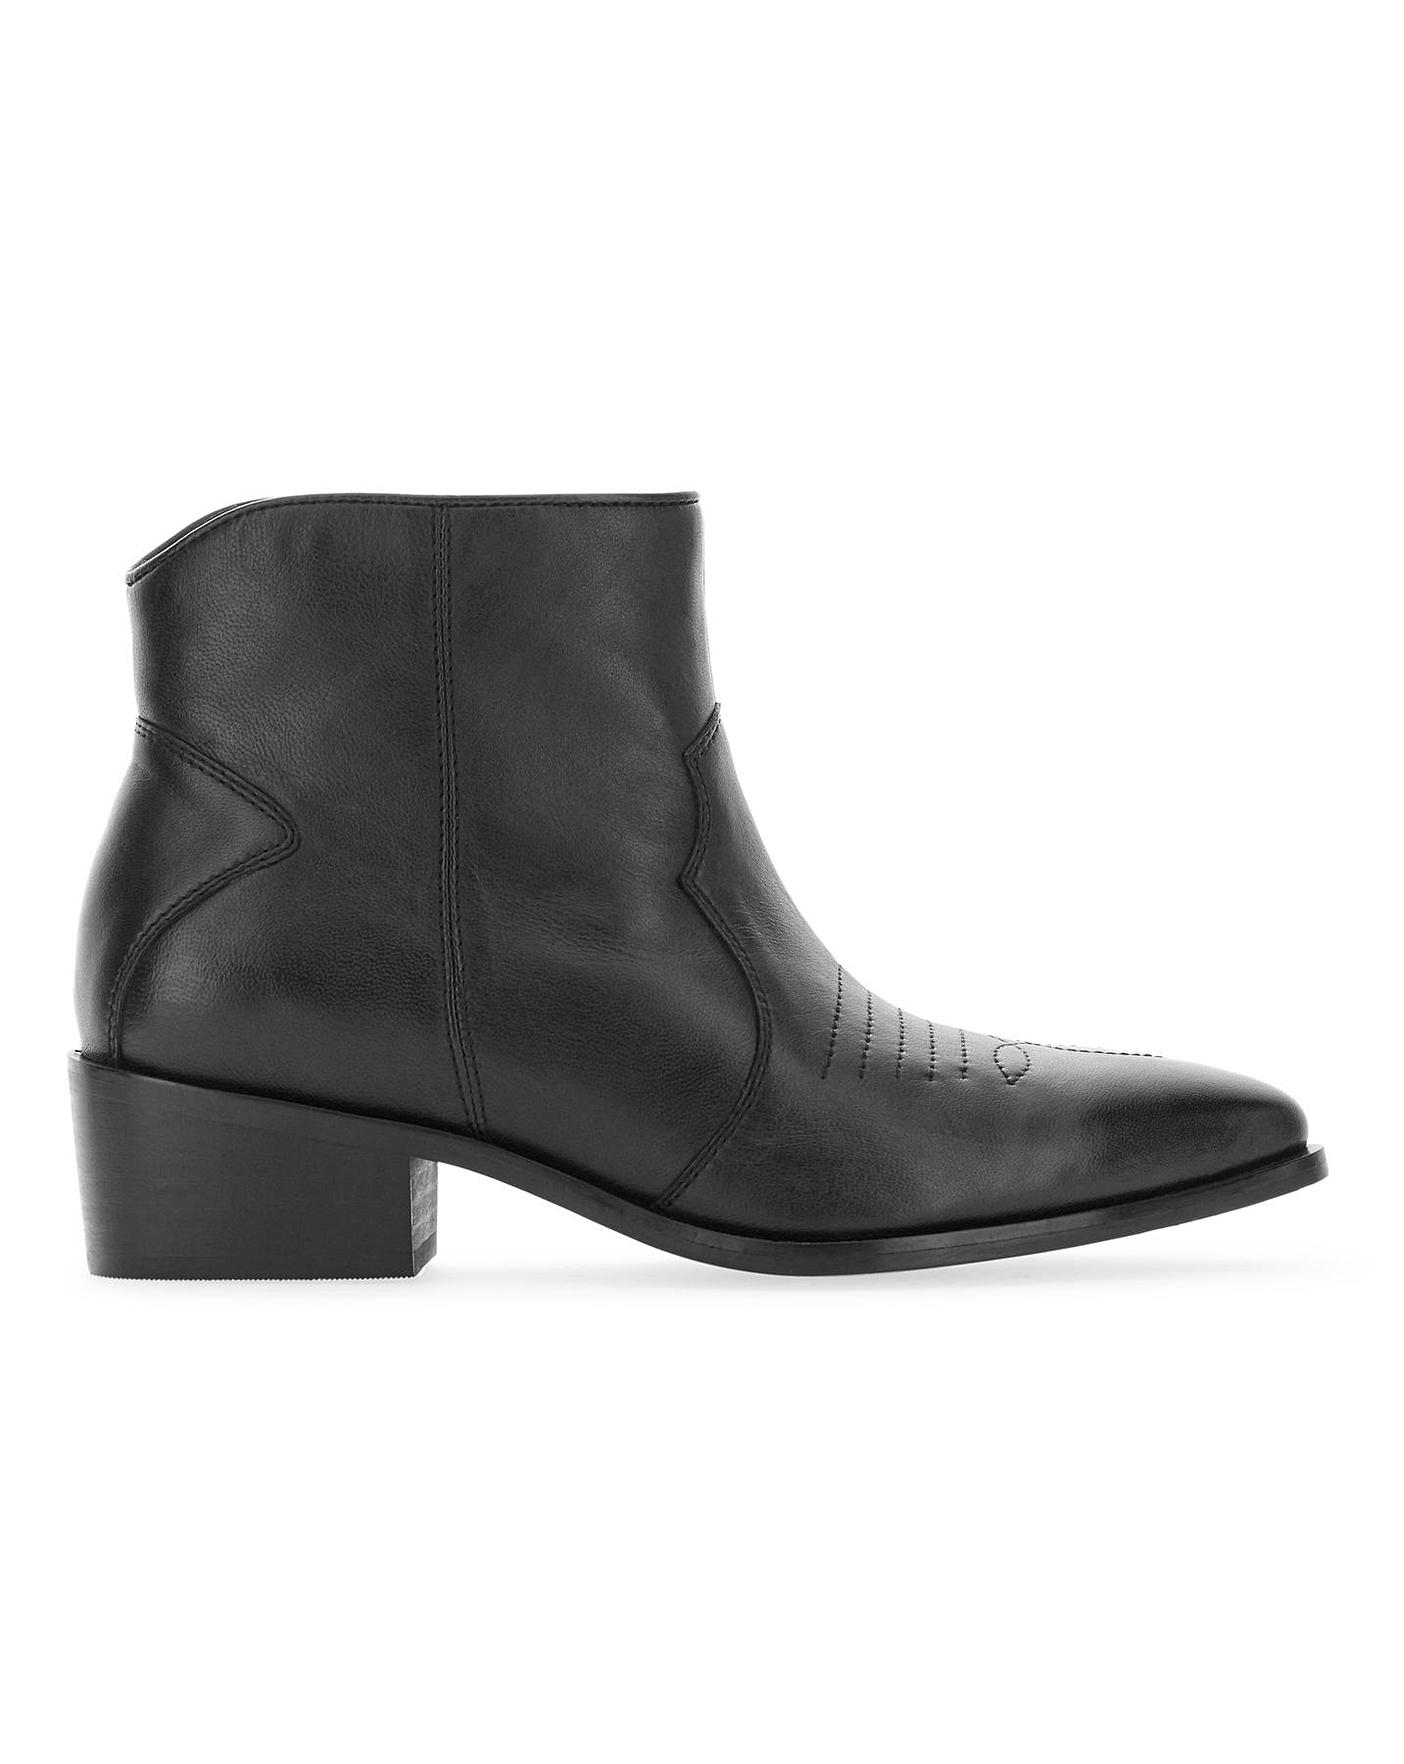 Leather Western Ankle Boots E Fit | J D Williams